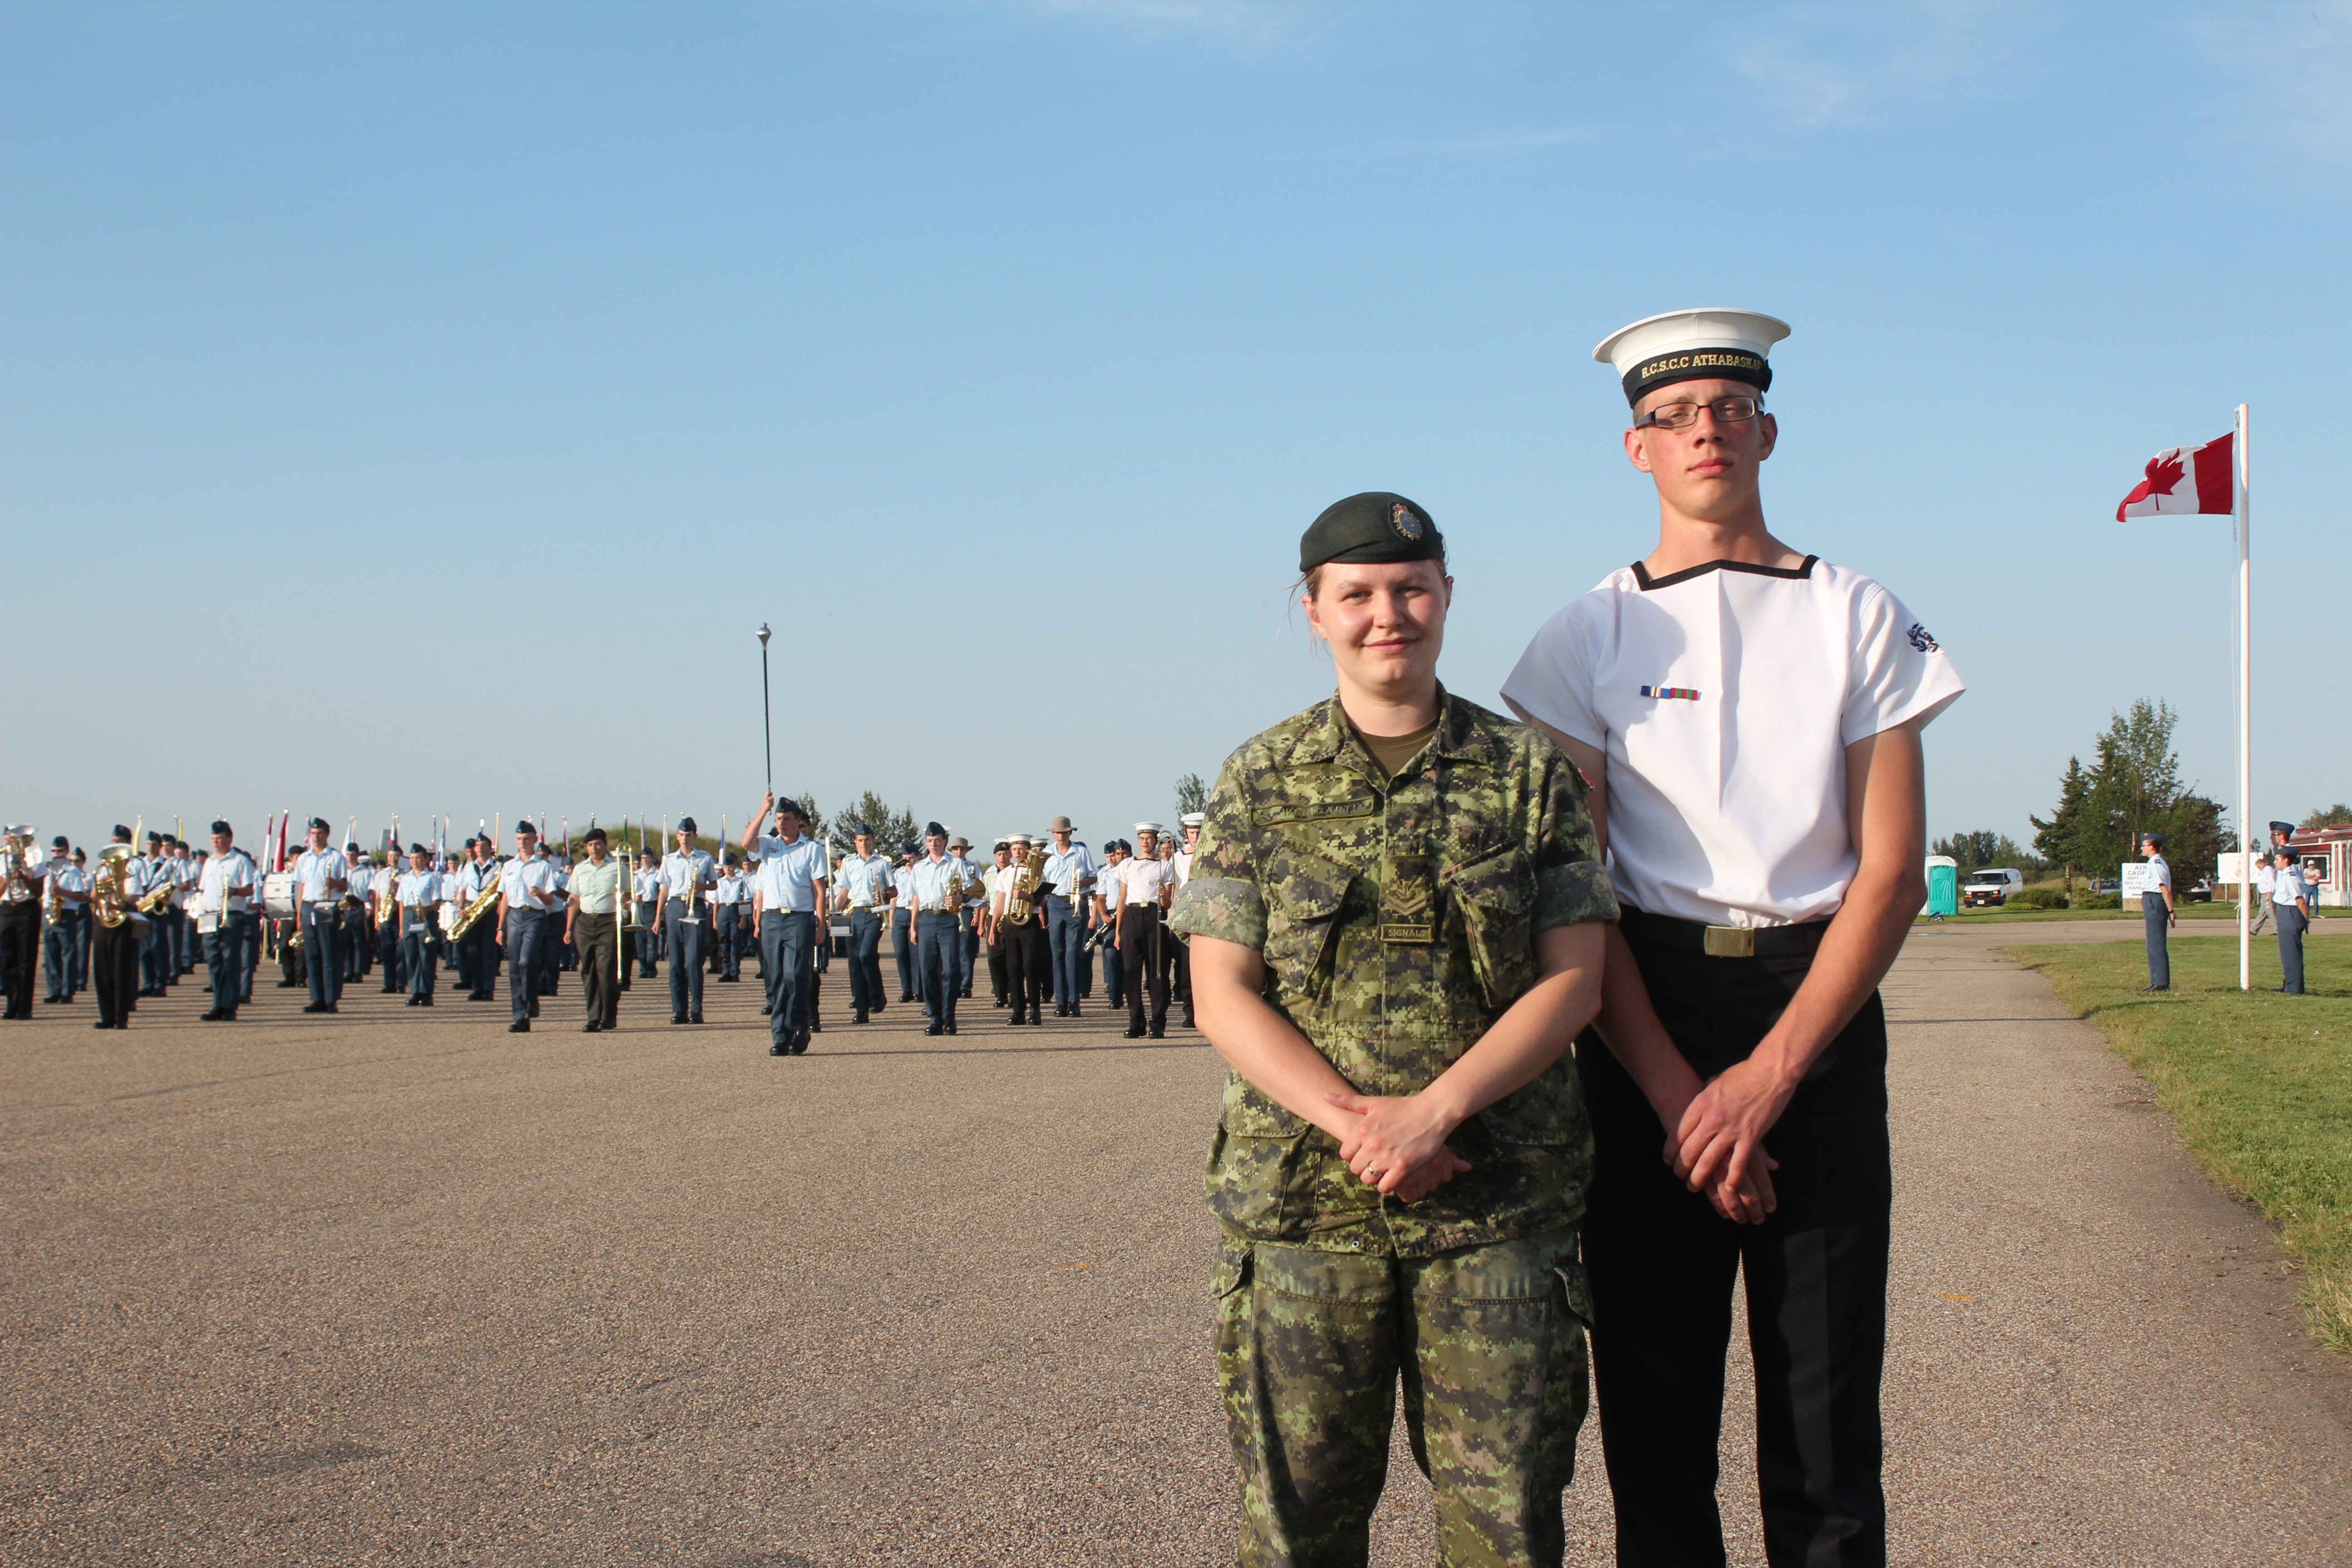 OPEN HOUSE - Master Cpl. Anna Weingartl and Chief Petty Officer 2nd Class Raymond Evans stand together during a sunset ceremony at the open house for the Penhold Cadets recently.